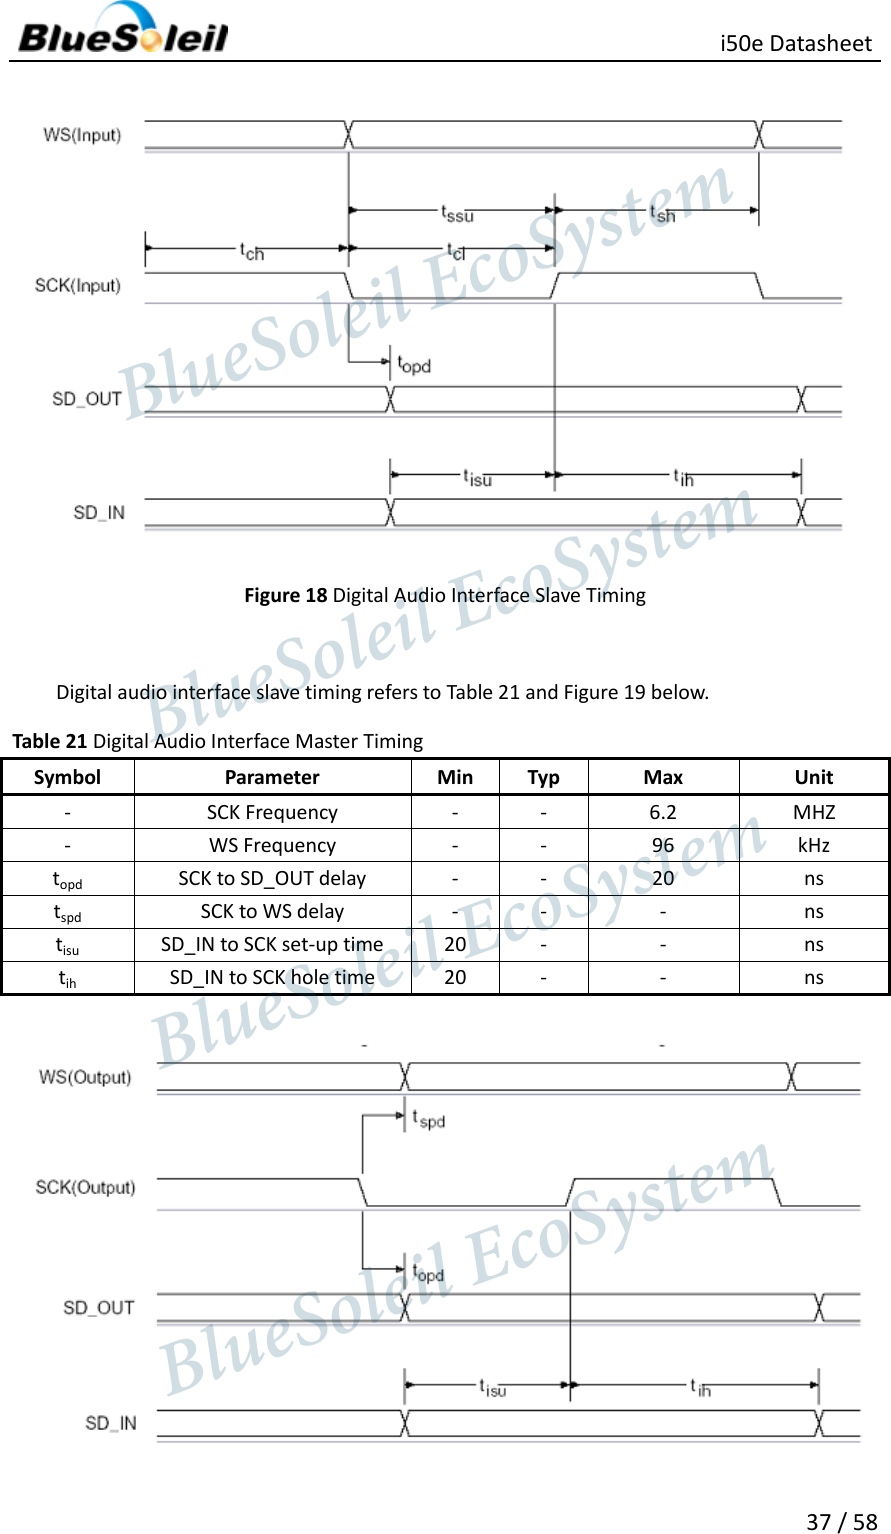                                                   i50e Datasheet 37 / 58  Figure 18 Digital Audio Interface Slave Timing    Digital audio interface slave timing refers to Table 21 and Figure 19 below. Table 21 Digital Audio Interface Master Timing Symbol Parameter Min Typ Max Unit - SCK Frequency - - 6.2 MHZ - WS Frequency - - 96 kHz topd SCK to SD_OUT delay - - 20 ns tspd SCK to WS delay - - - ns tisu SD_IN to SCK set-up time 20 - - ns tih SD_IN to SCK hole time 20 - - ns                   BlueSoleil EcoSystem            BlueSoleil EcoSystem      BlueSoleil EcoSystemBlueSoleil EcoSystem